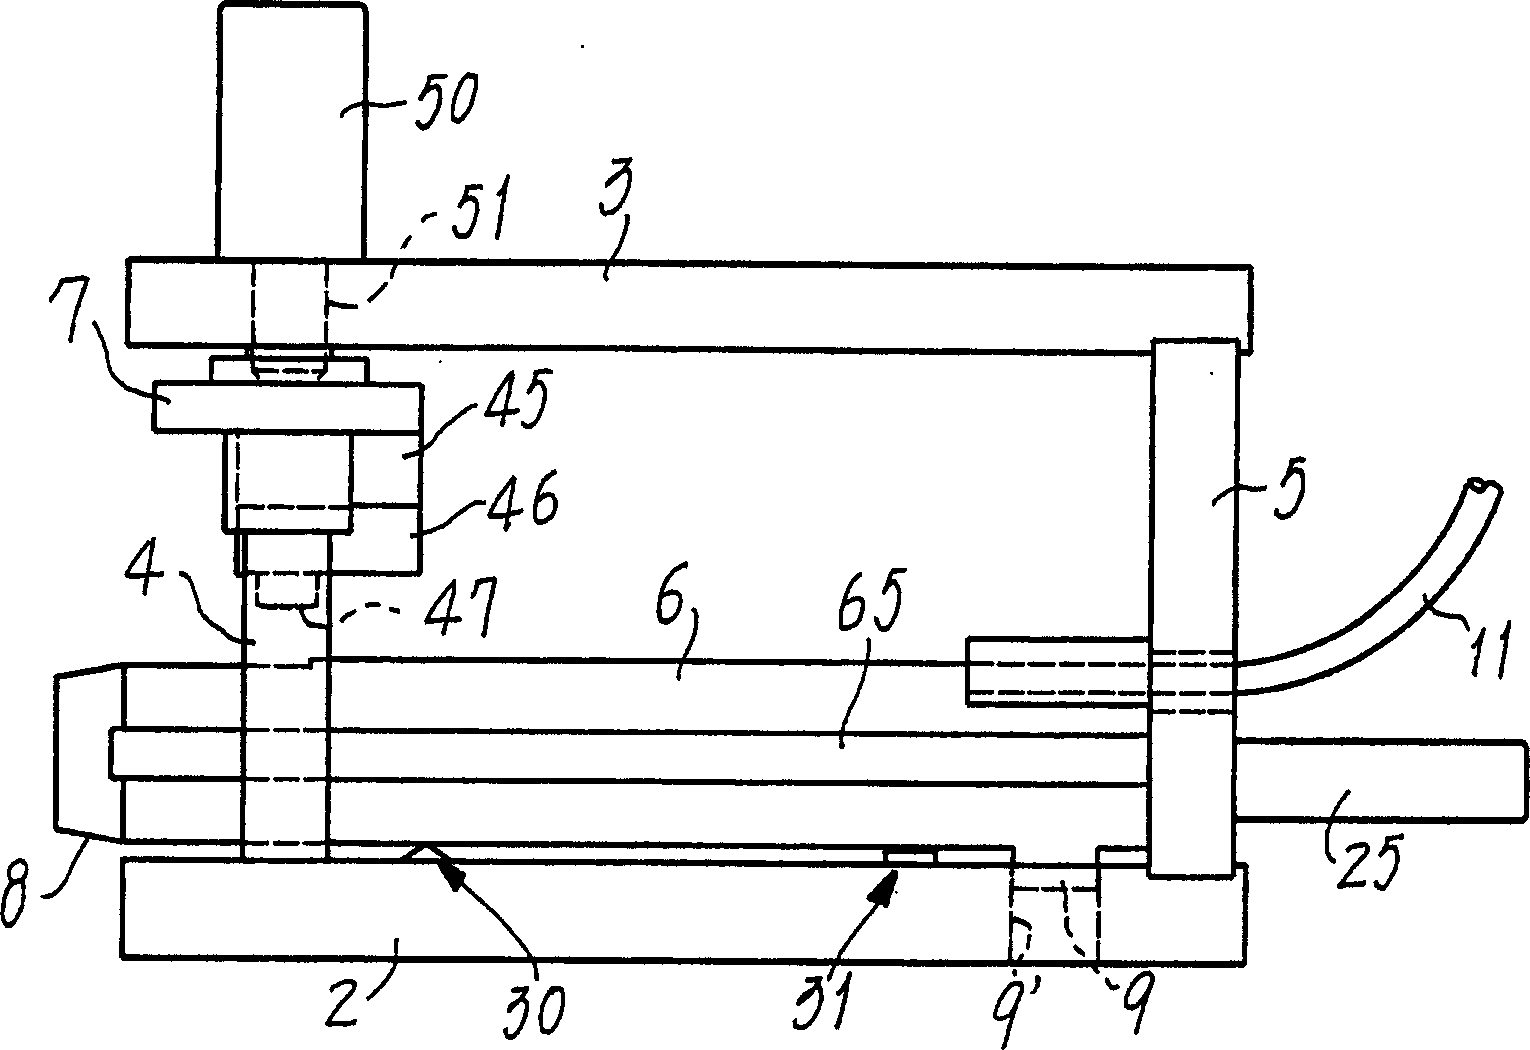 Press for attaching nuts to pipes